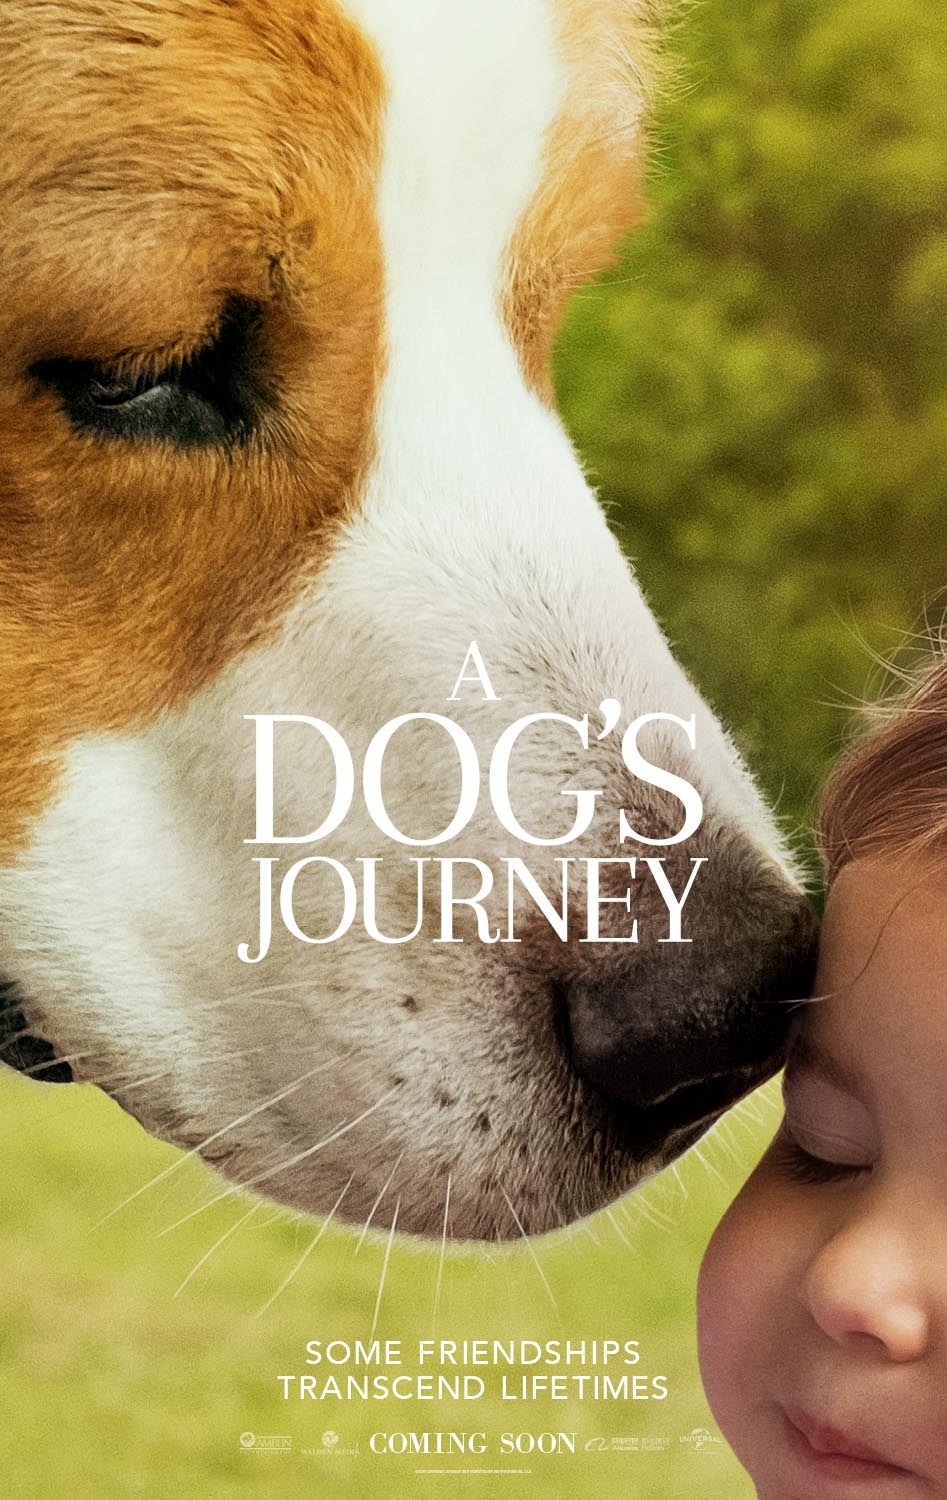 Extra Large Movie Poster Image for A Dog's Journey (#8 of 11)